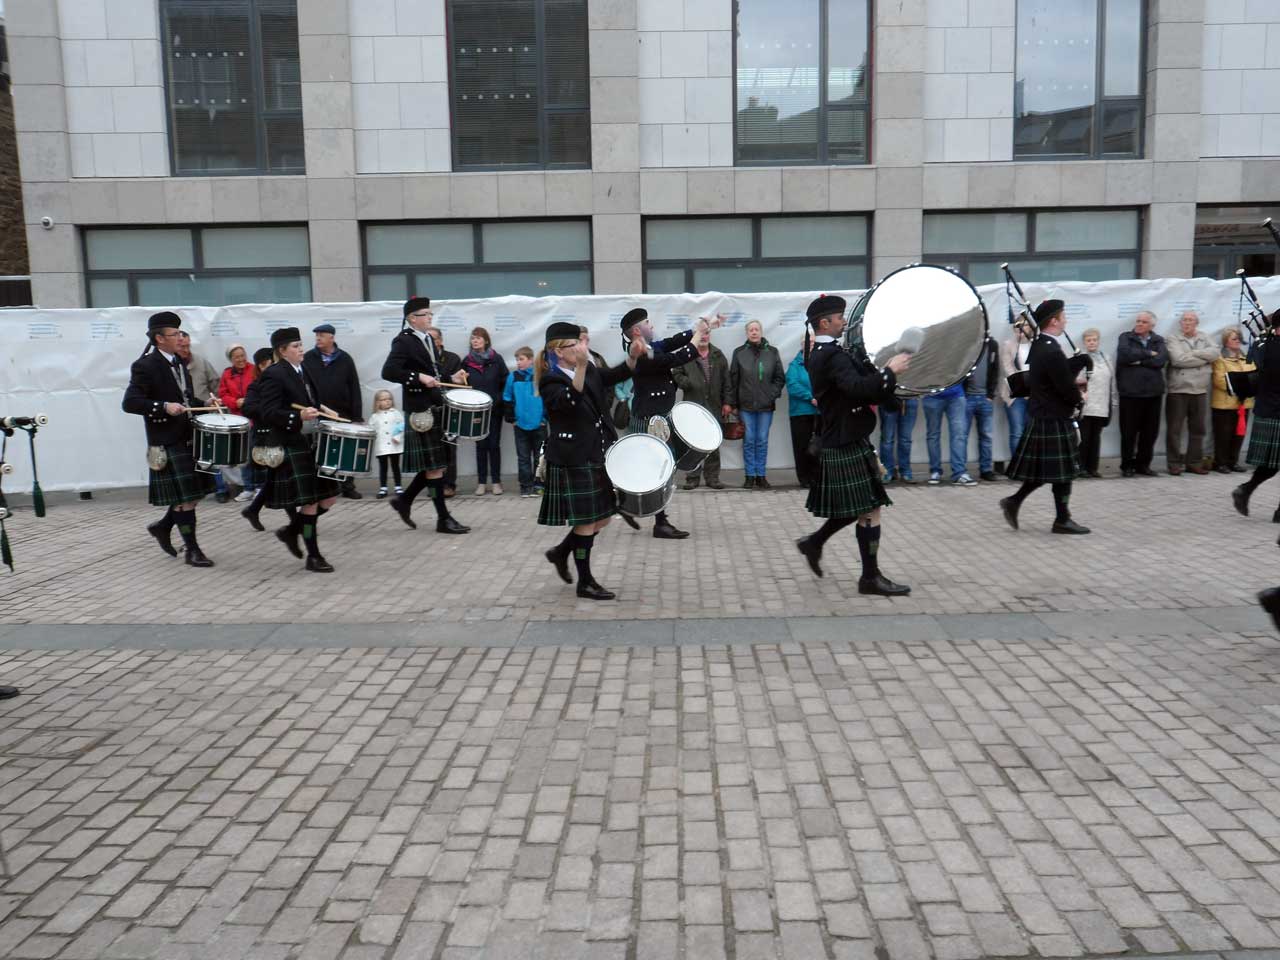 Photo: Massed Pipe Bands At Market Square, Wick